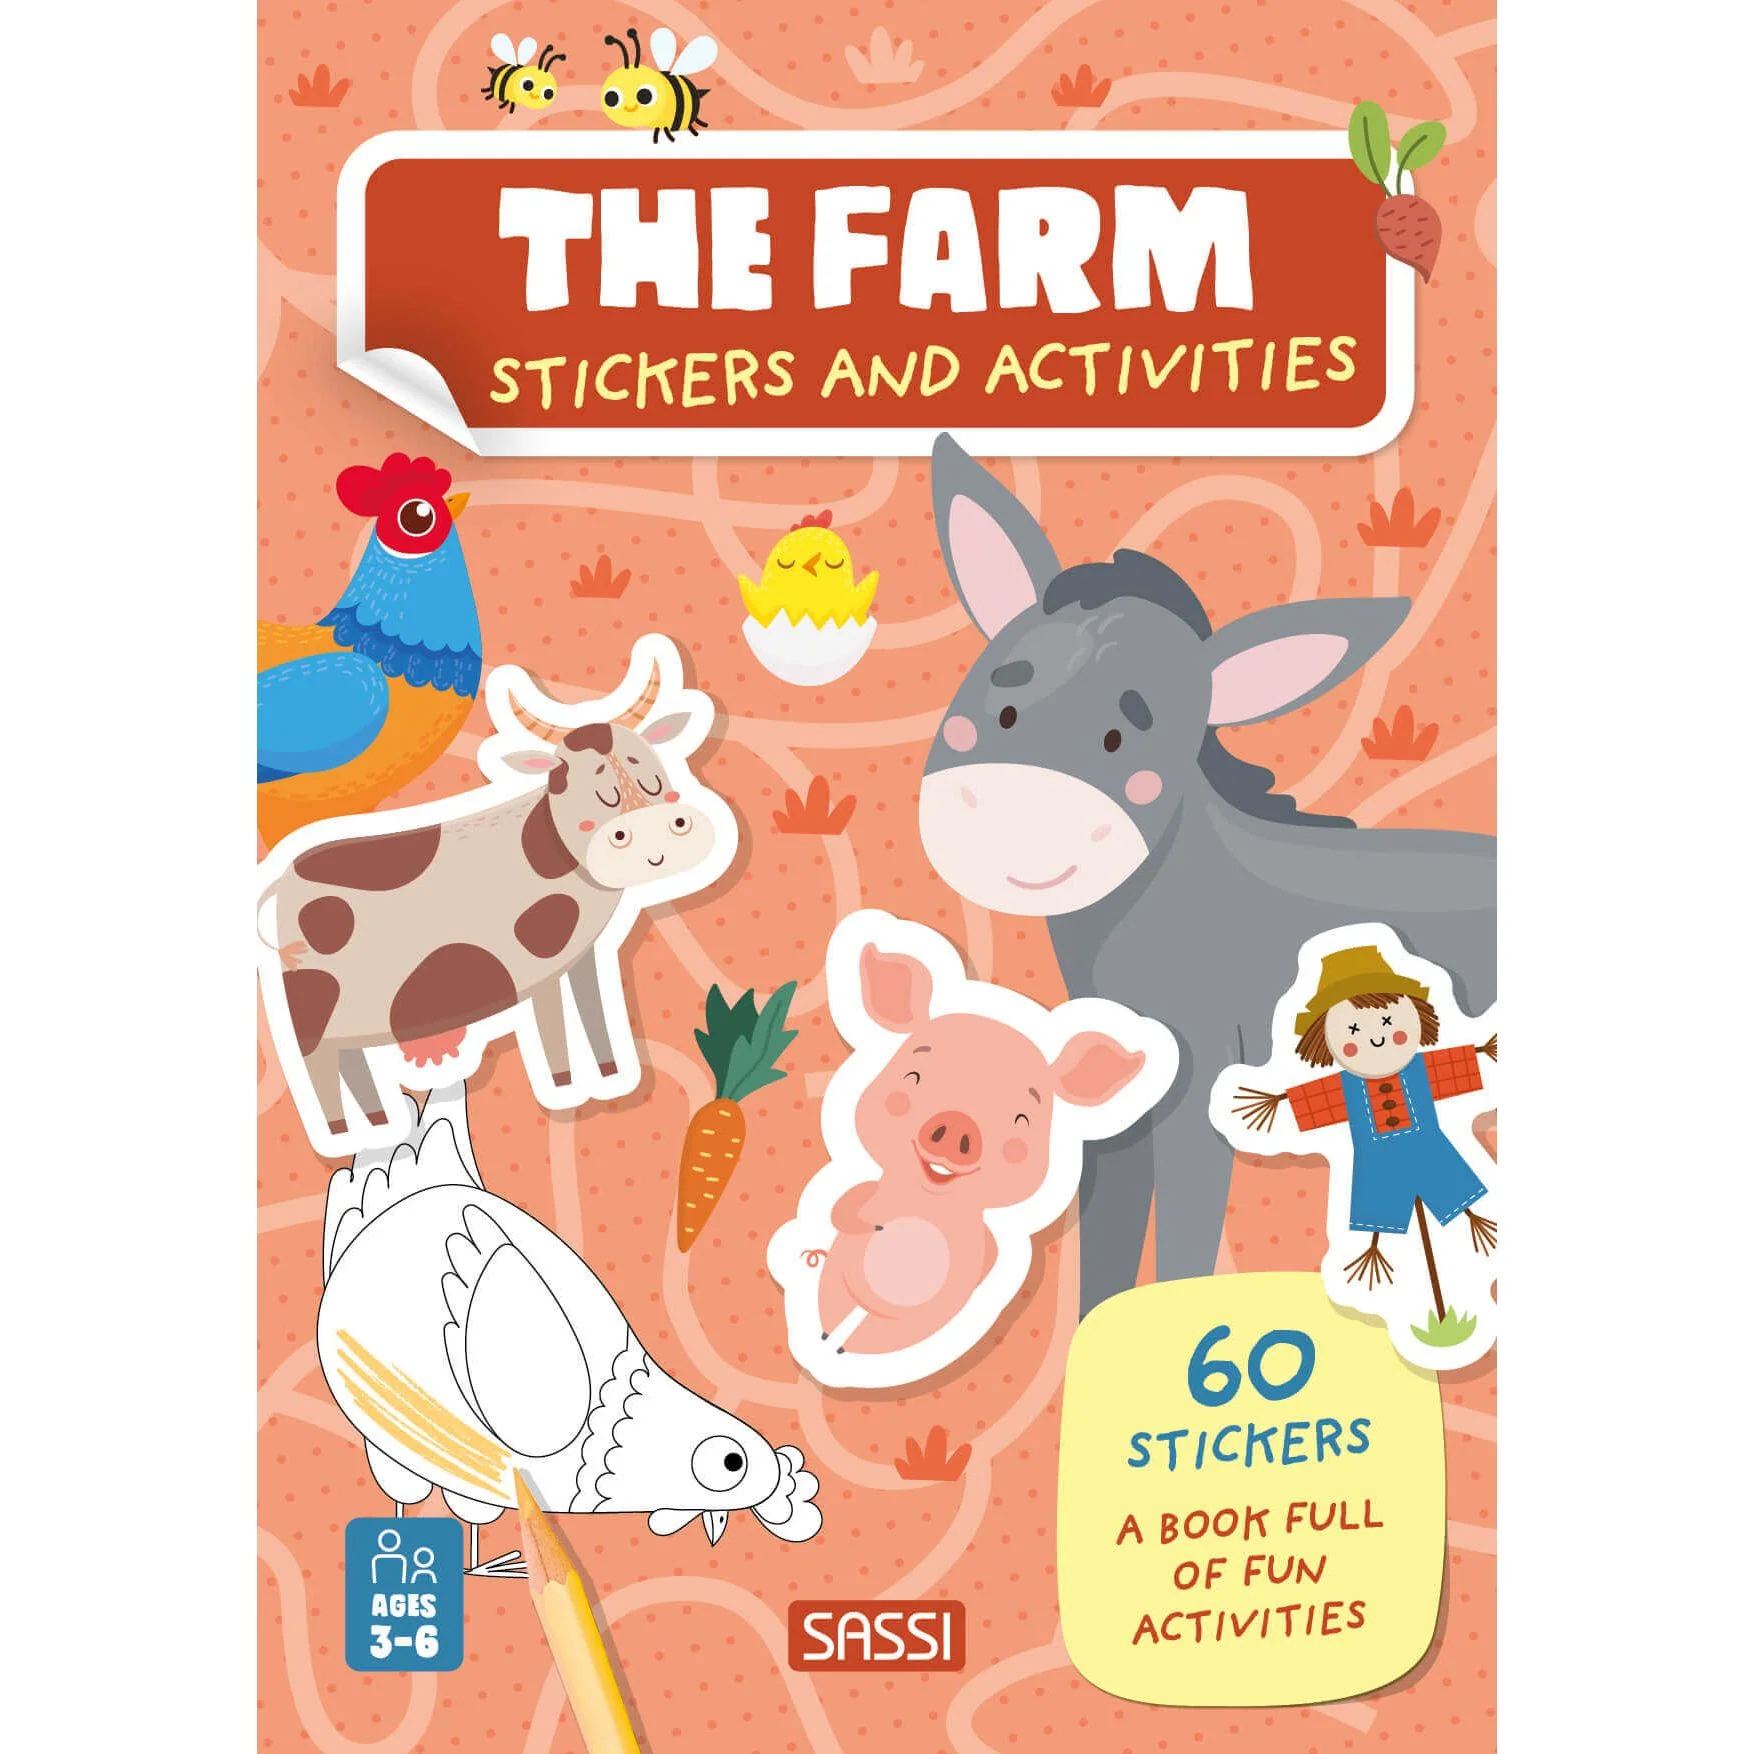 STICKERS & ACTIVITIES - THE FARM